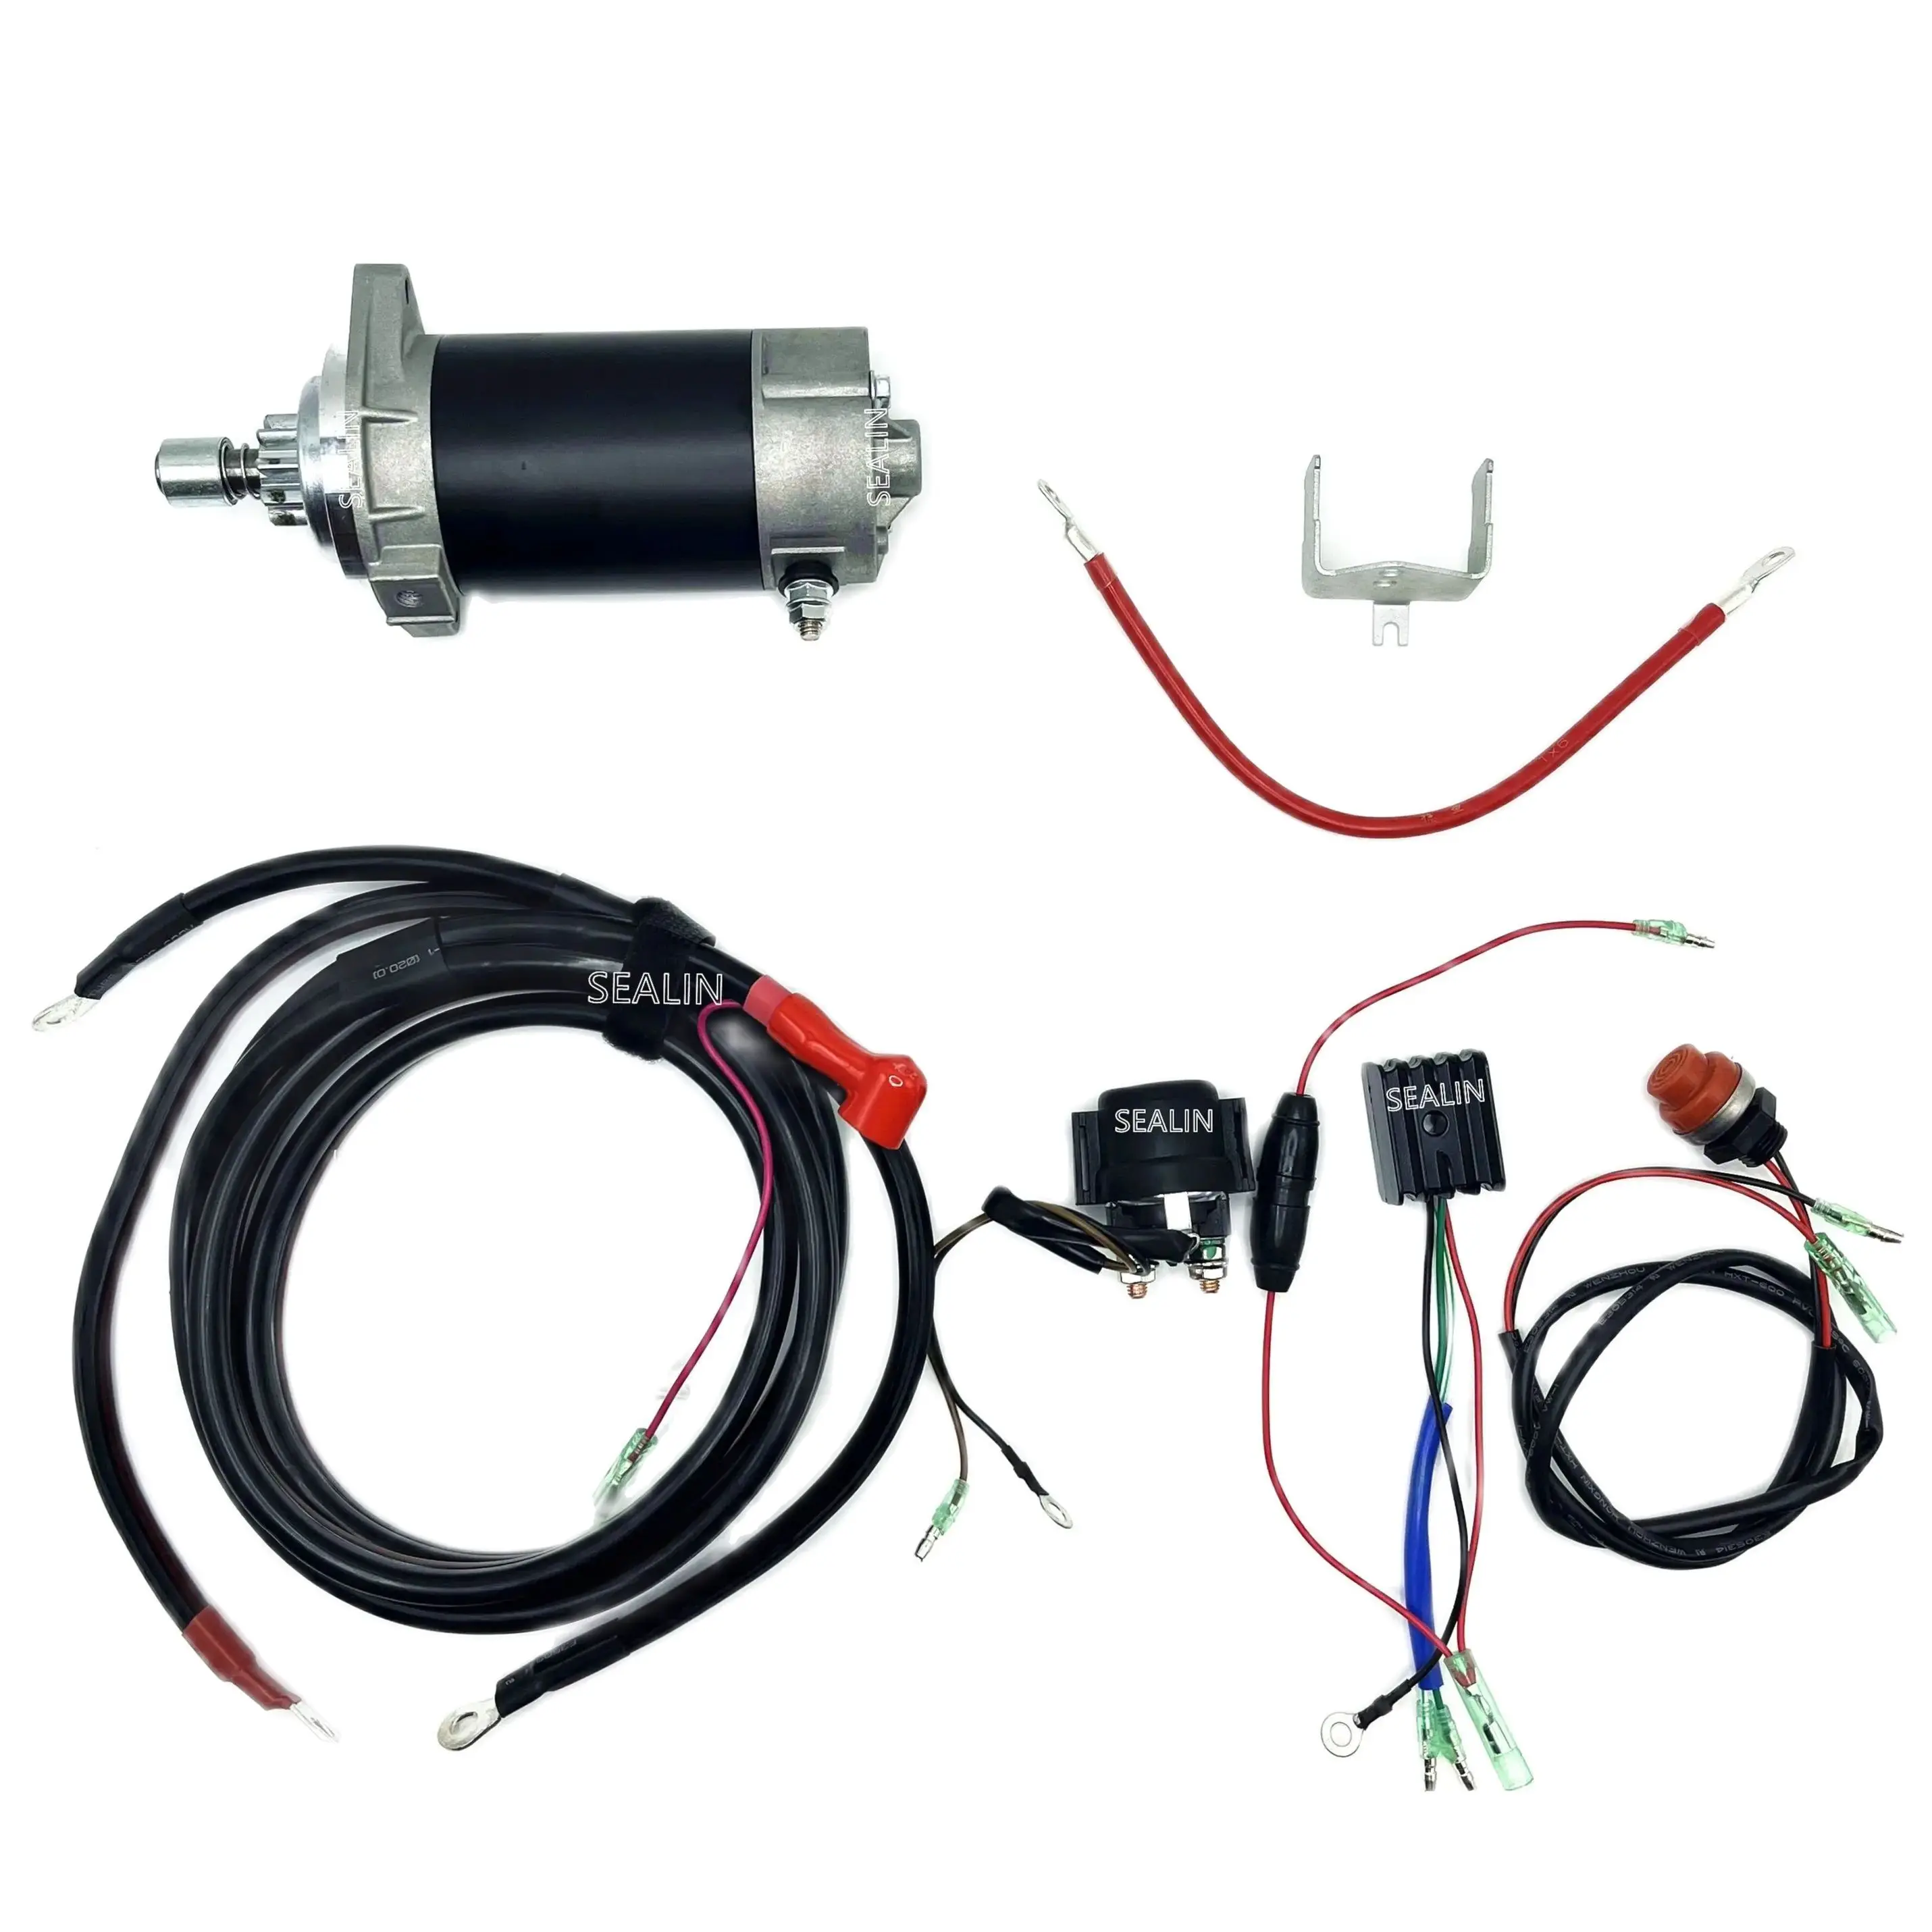 

ELECTRIC START KIT FOR MERCURY 9.9HP 10HP 15HP 20HP EFI 4 STROKE 2 CYLINDER OUTBOARD MOTOR 1R134448